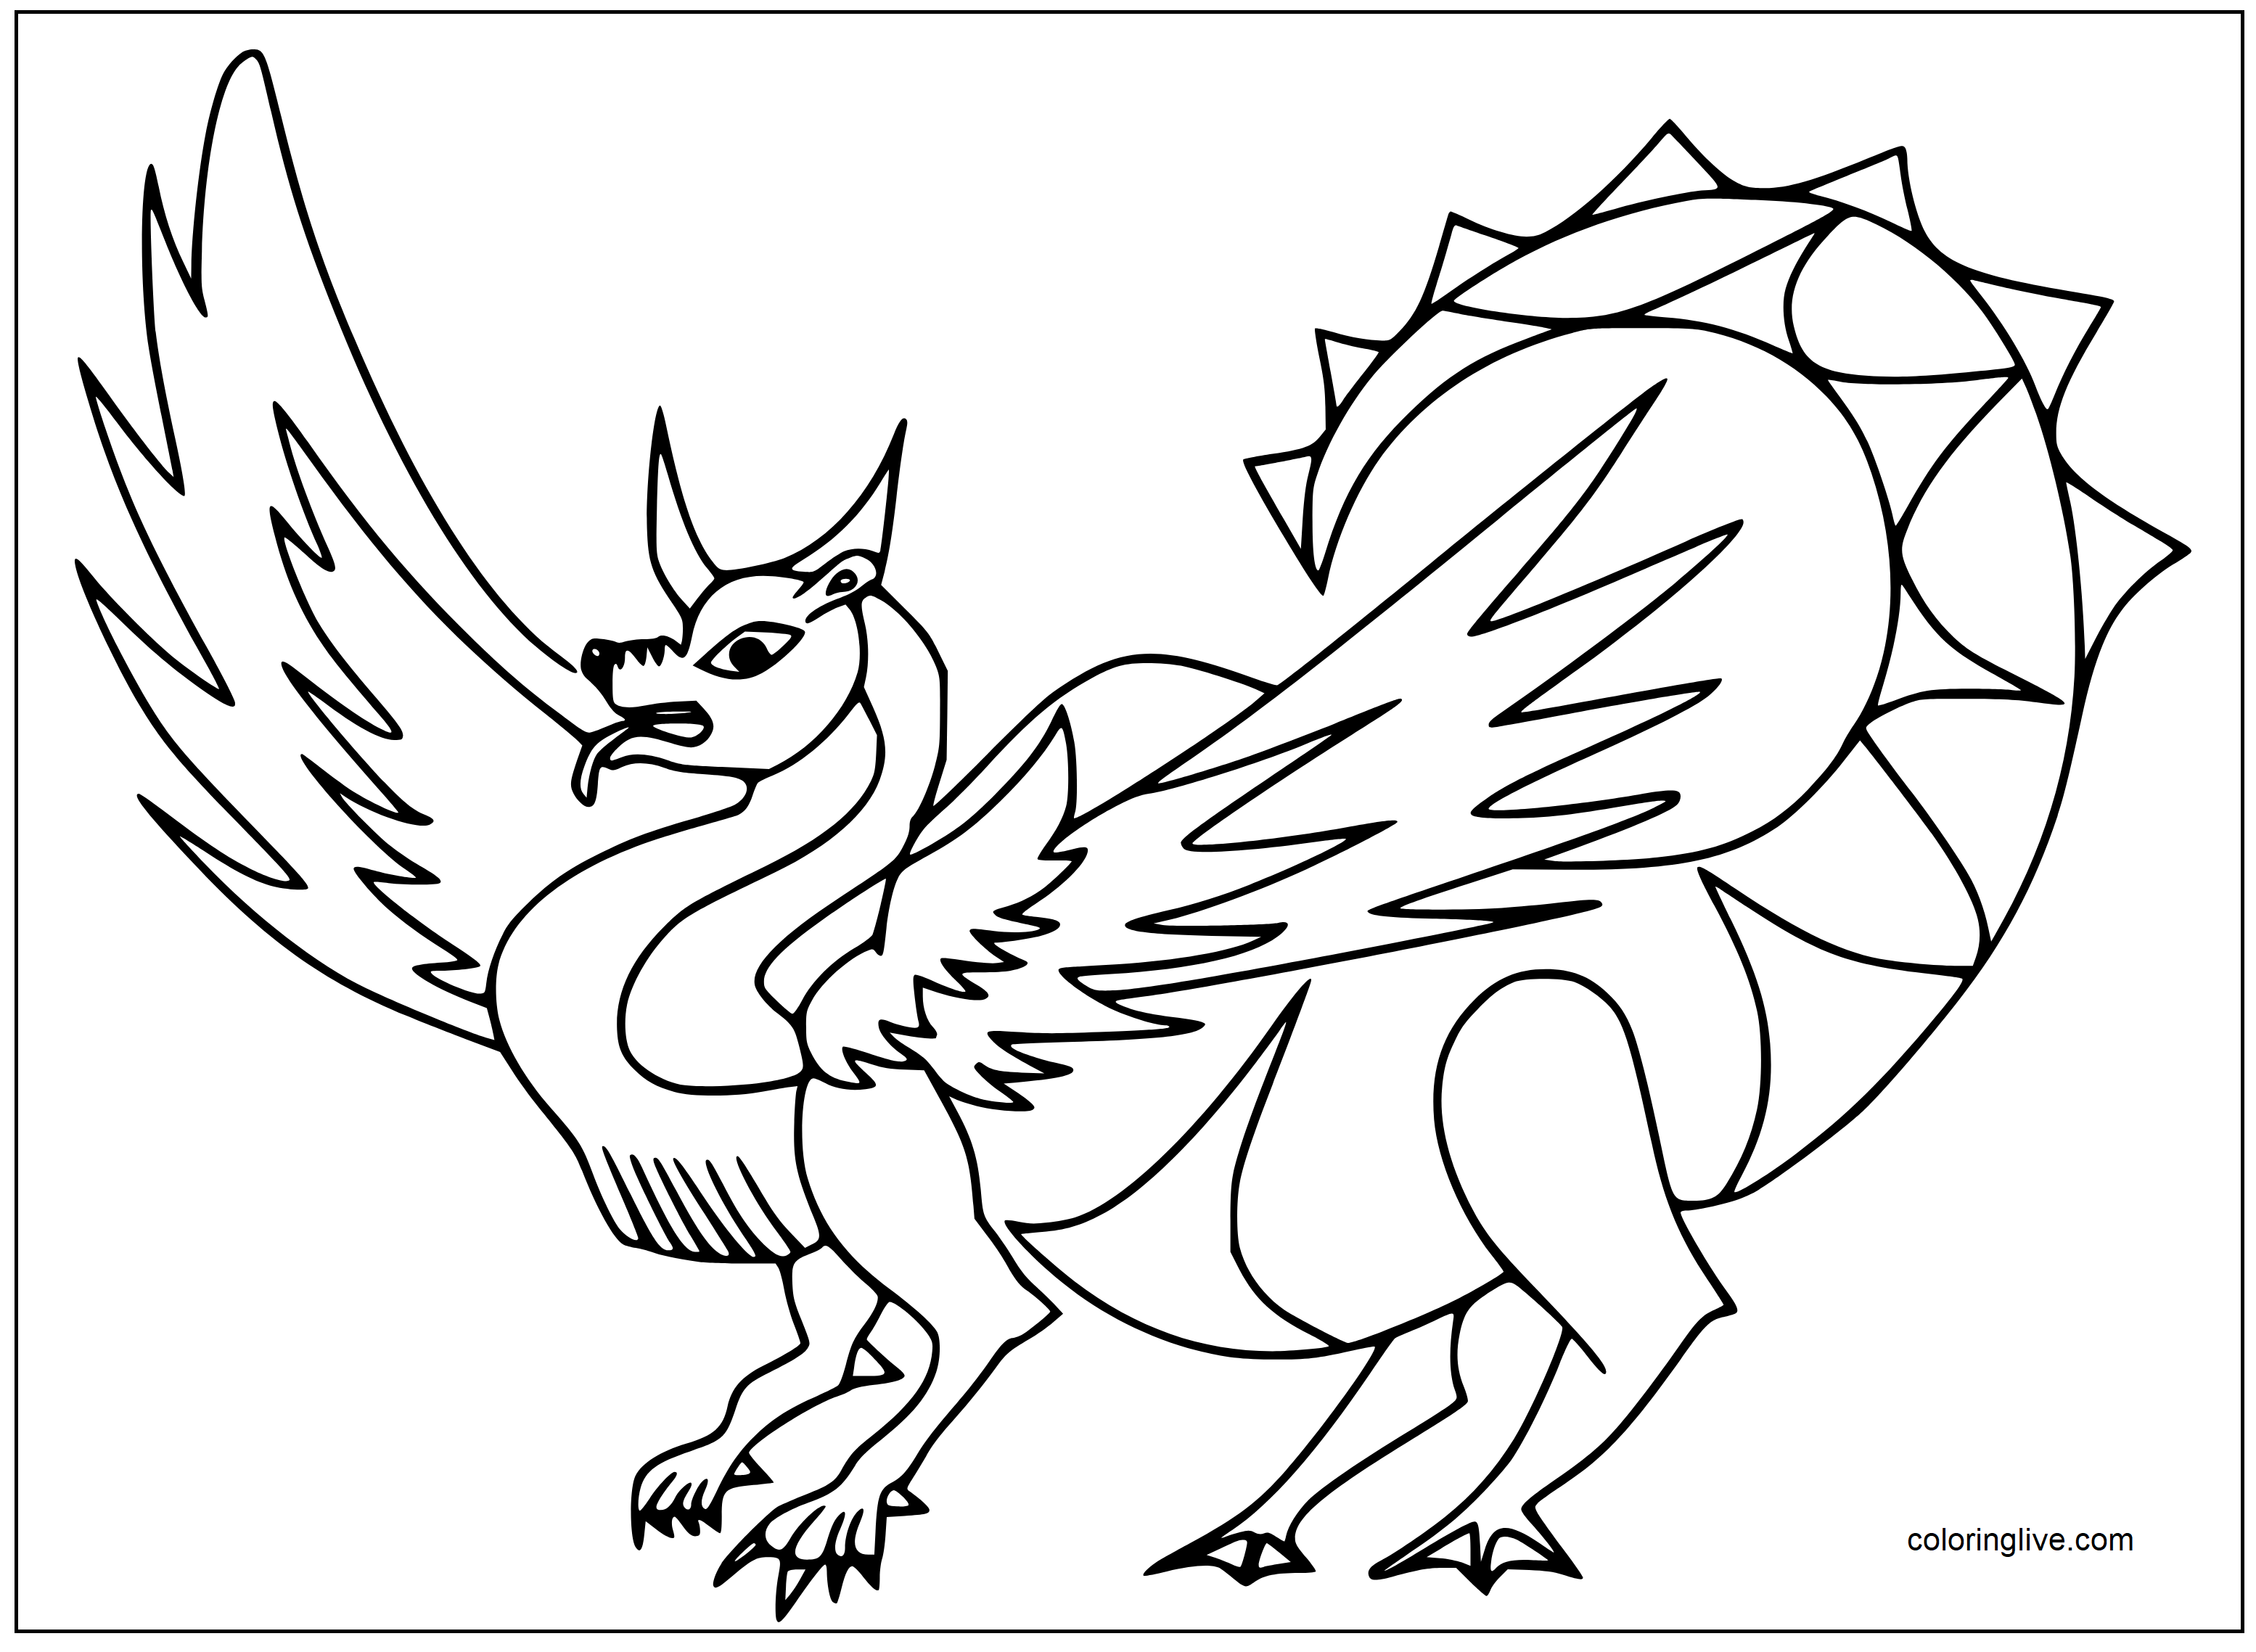 Printable Sweet dragon black white Coloring Page for kids.